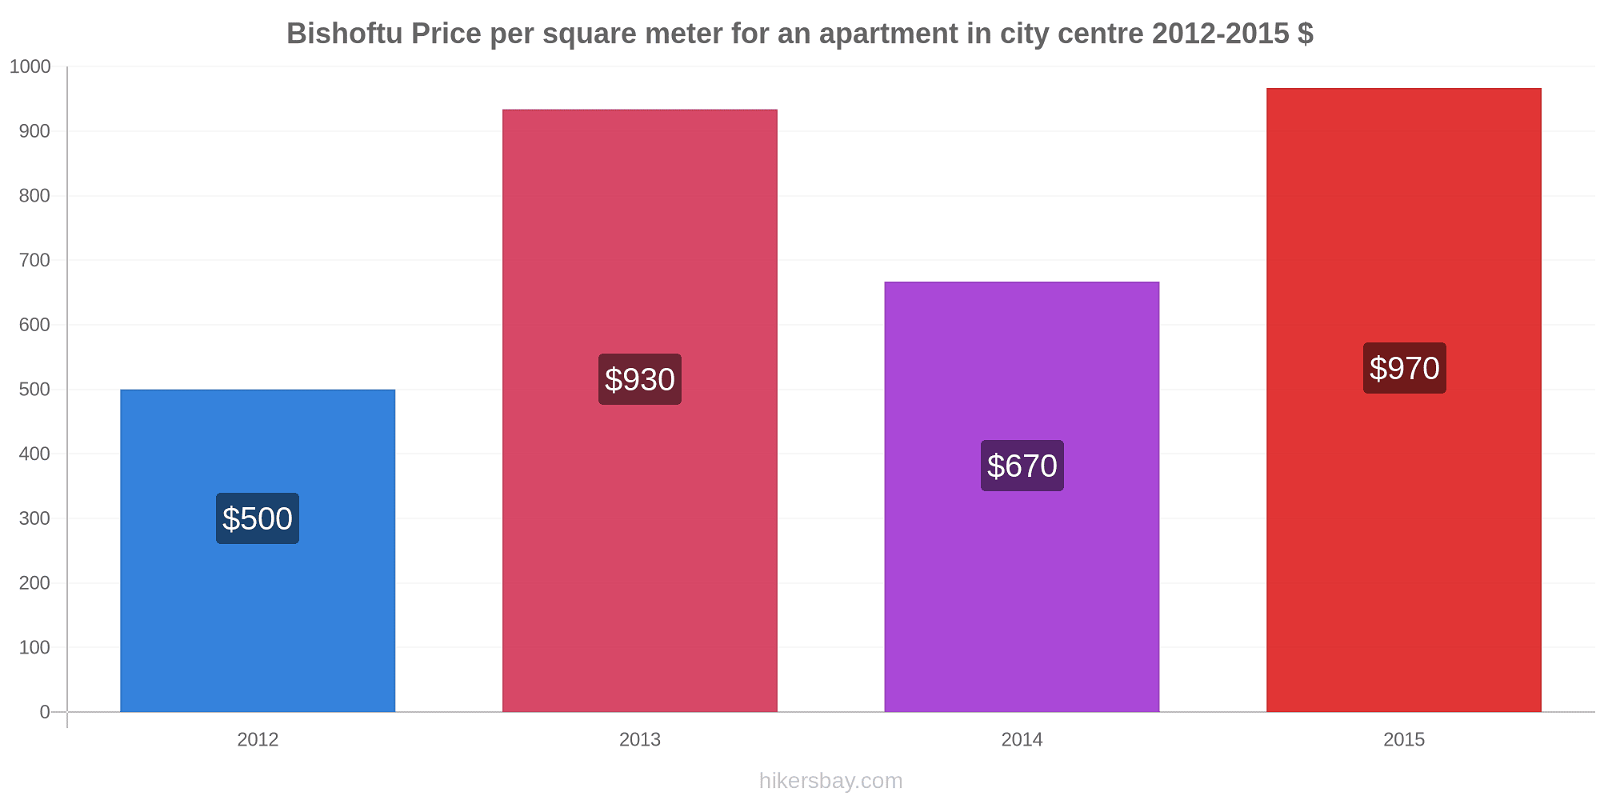 Bishoftu price changes Price per square meter for an apartment in city centre hikersbay.com